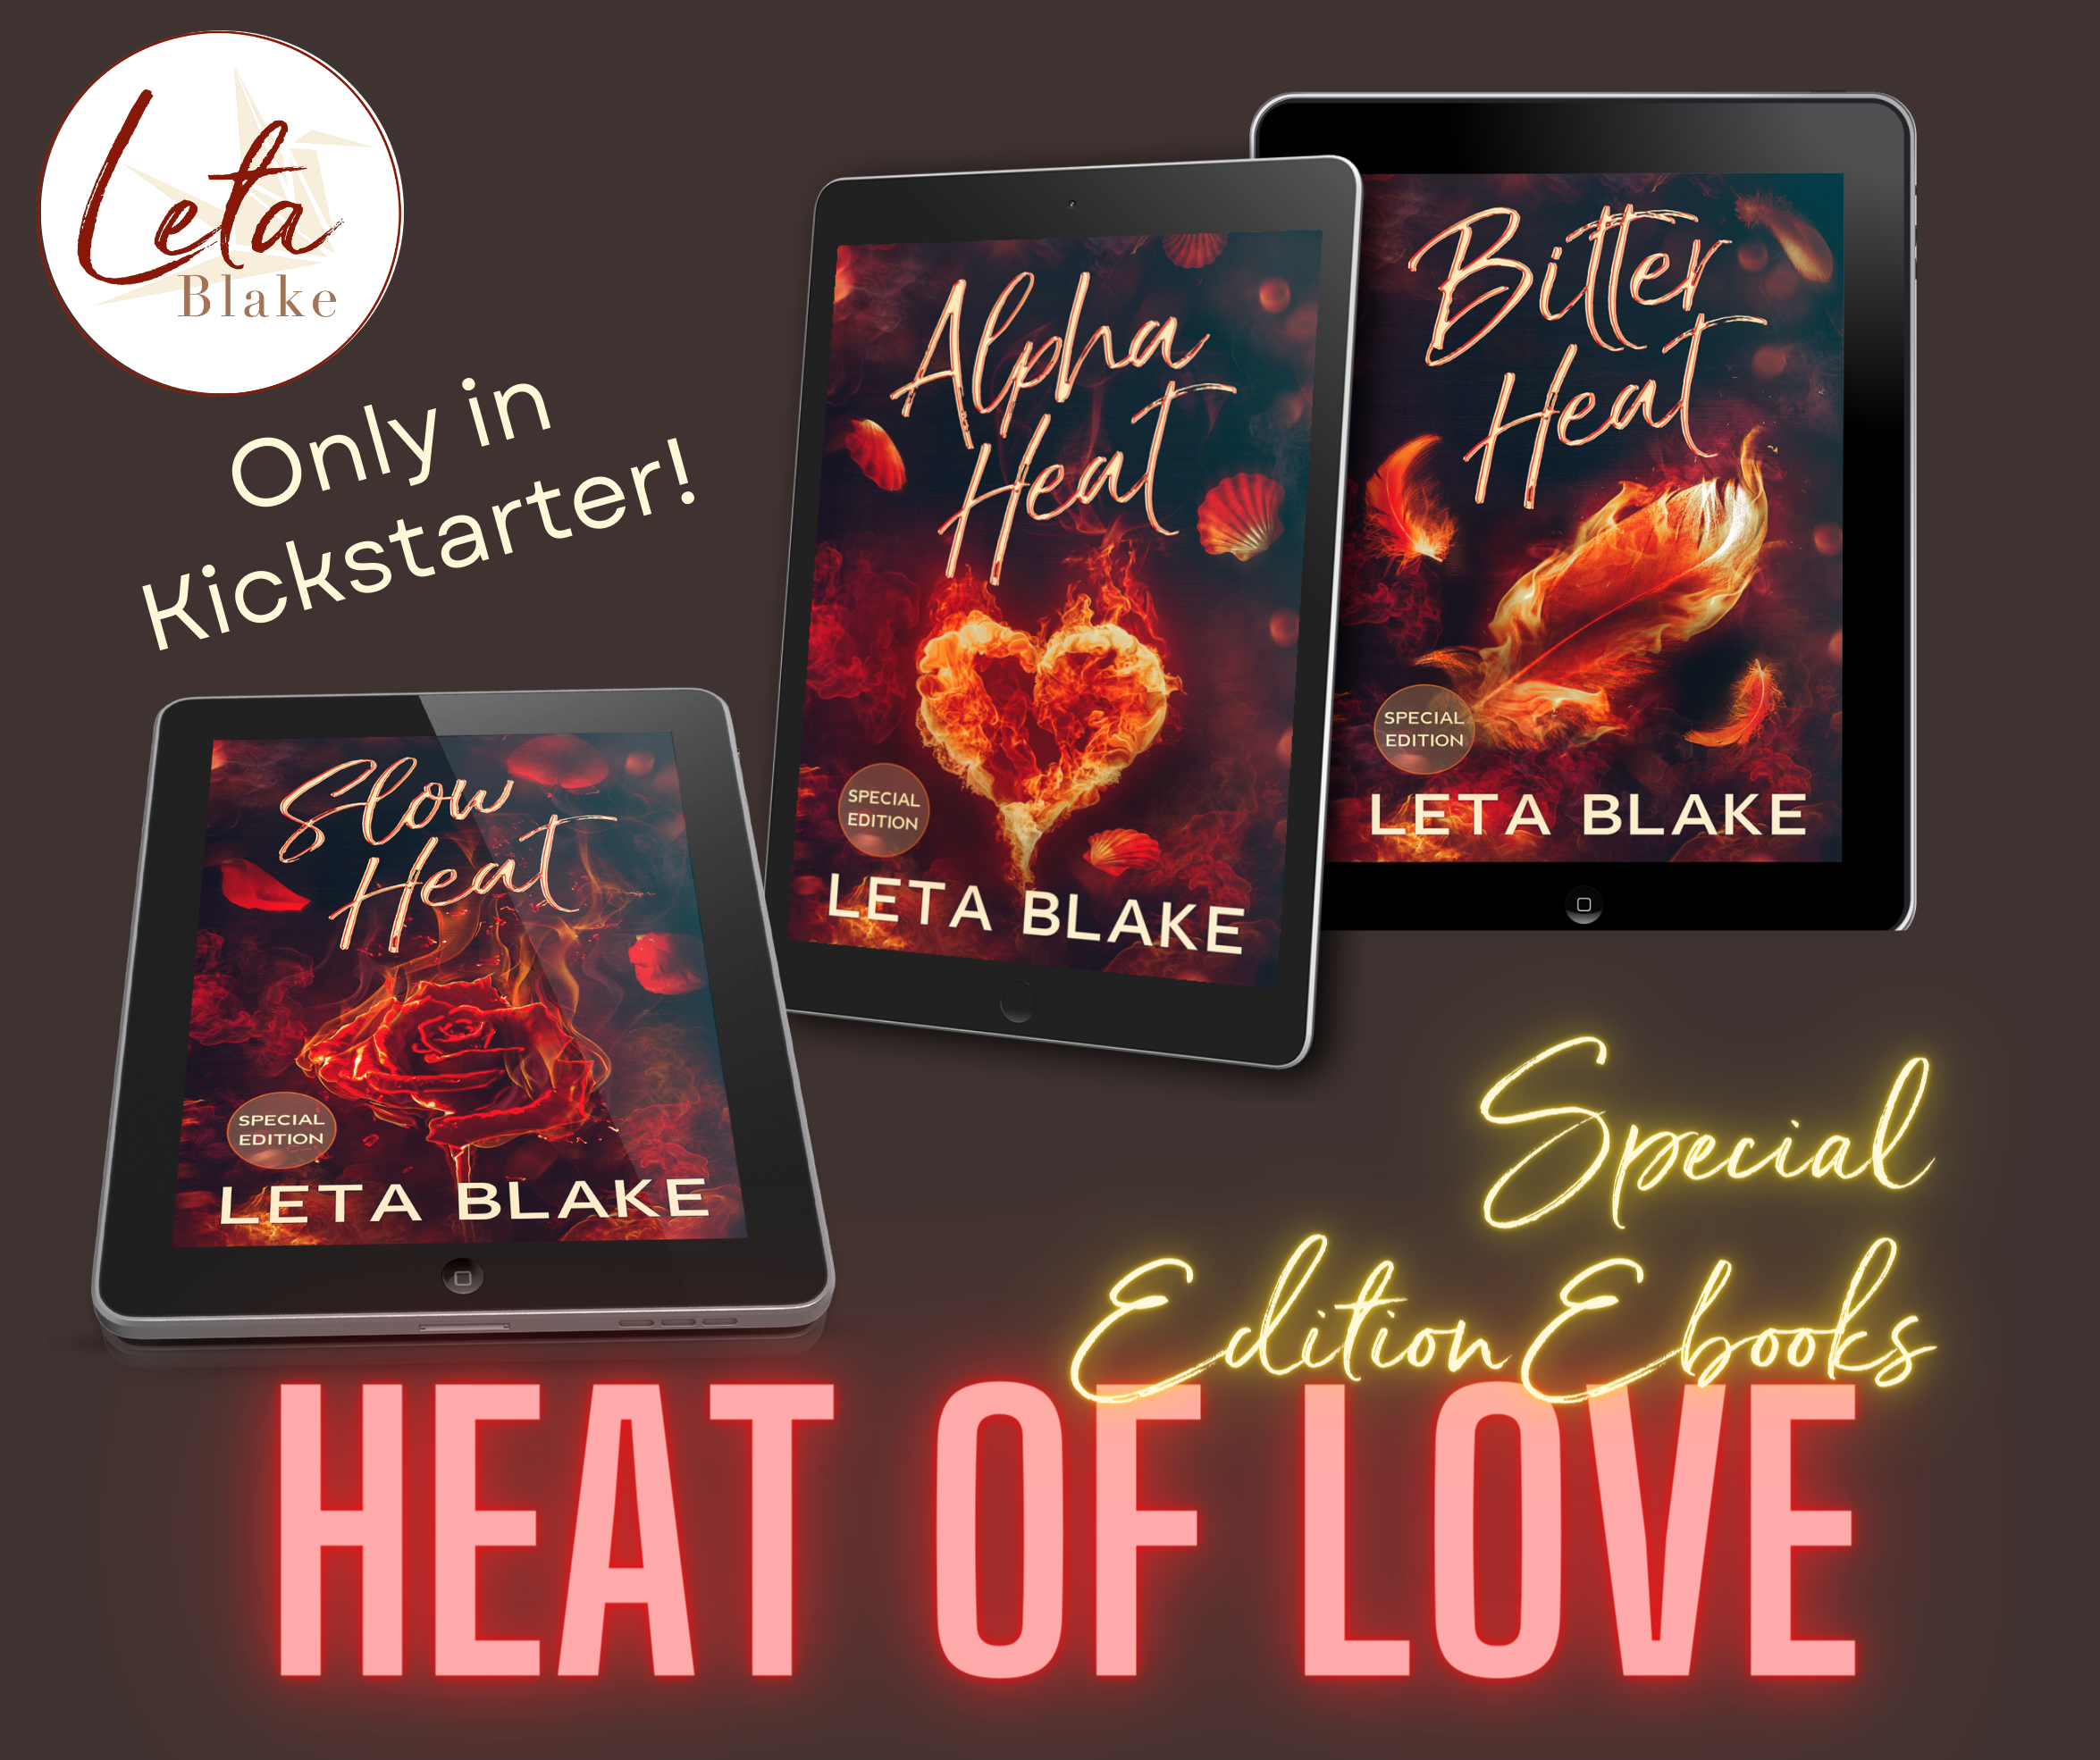 Image is three e-readers on a dark brown background. Each e-reader has one of the Heat of Love trilogy ebooks on it. The Slow Heat e-book cover features a rose on an abstract fiery background. The Alpha Heat e-book cover features a heart-shaped fire on an abstract fiery background. The Bitter Heat e-book cover features a feather on an abstract fiery background. Text reads:  "Only in Kickstarter!", "Special Edition Ebooks", and "Heat of Love".